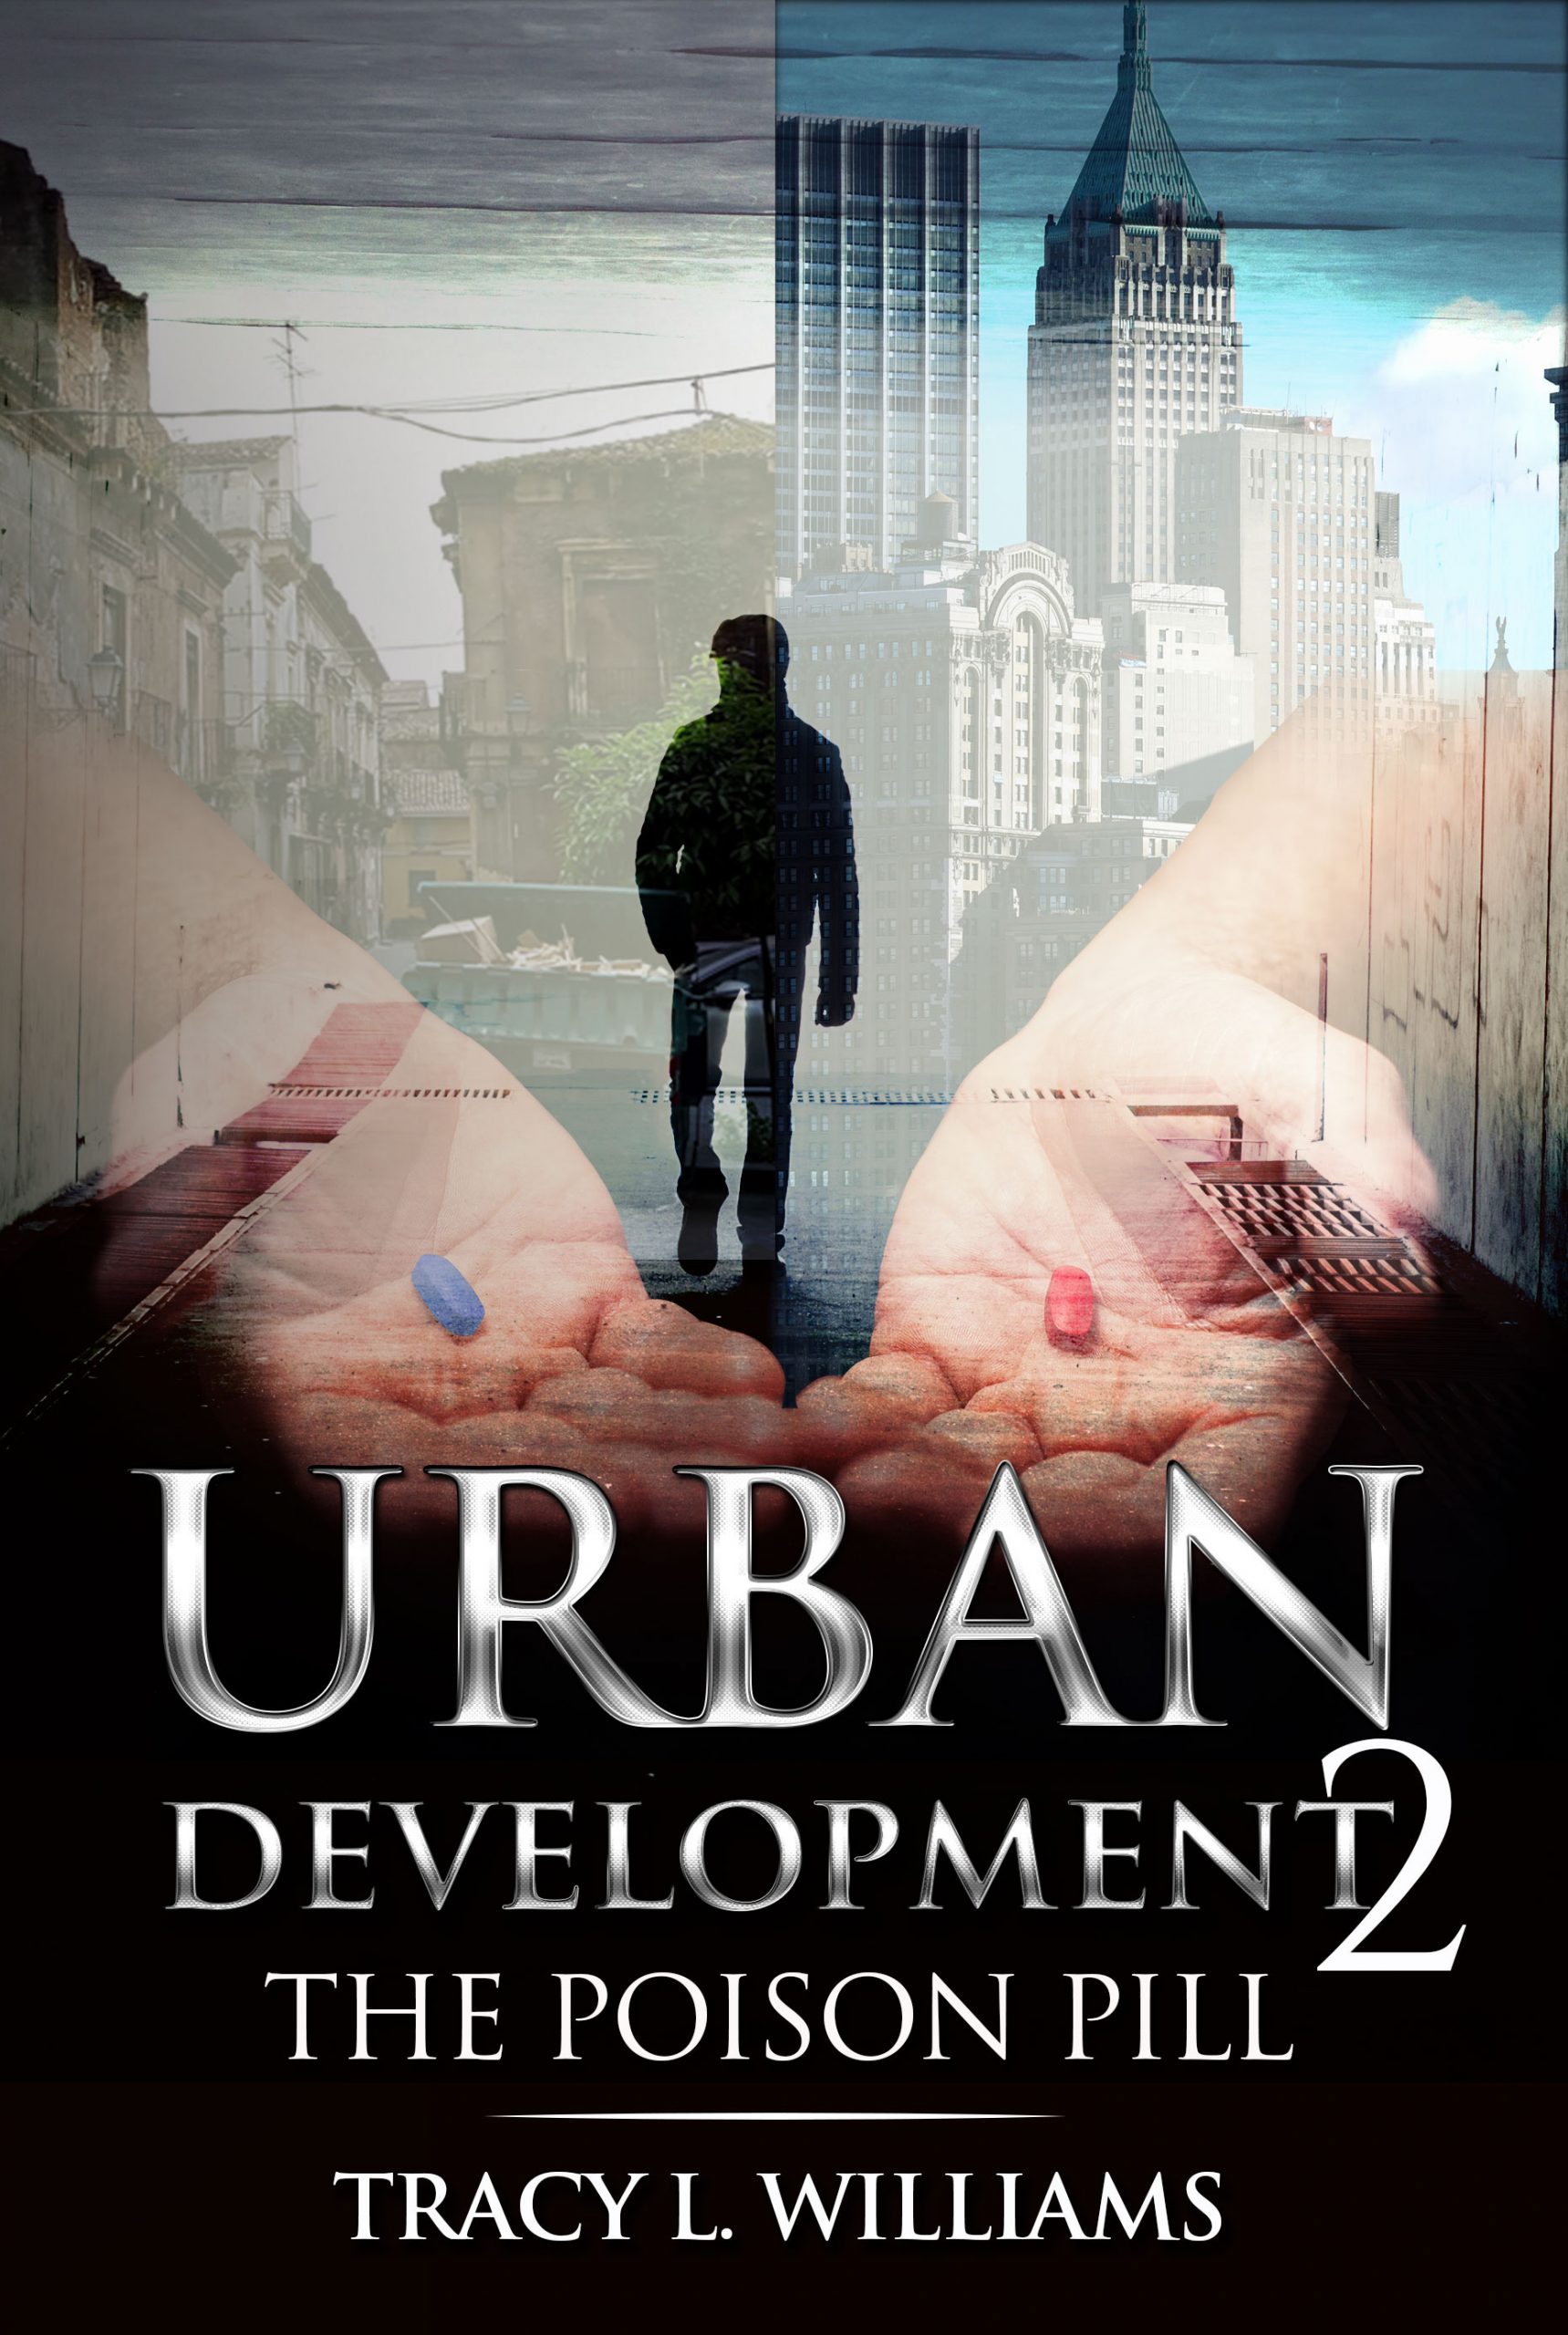 Urban Development 2 Book Cover, background split landscapes, one upscale urban business area with skyscrapers, the other half destitute urban area. Foreground a pair of hands reaching out from the buildings one presenting a red pill, the other presenting a blue pill, standing in the middle of the hands is a silhouette of a man walking towards the split urban background